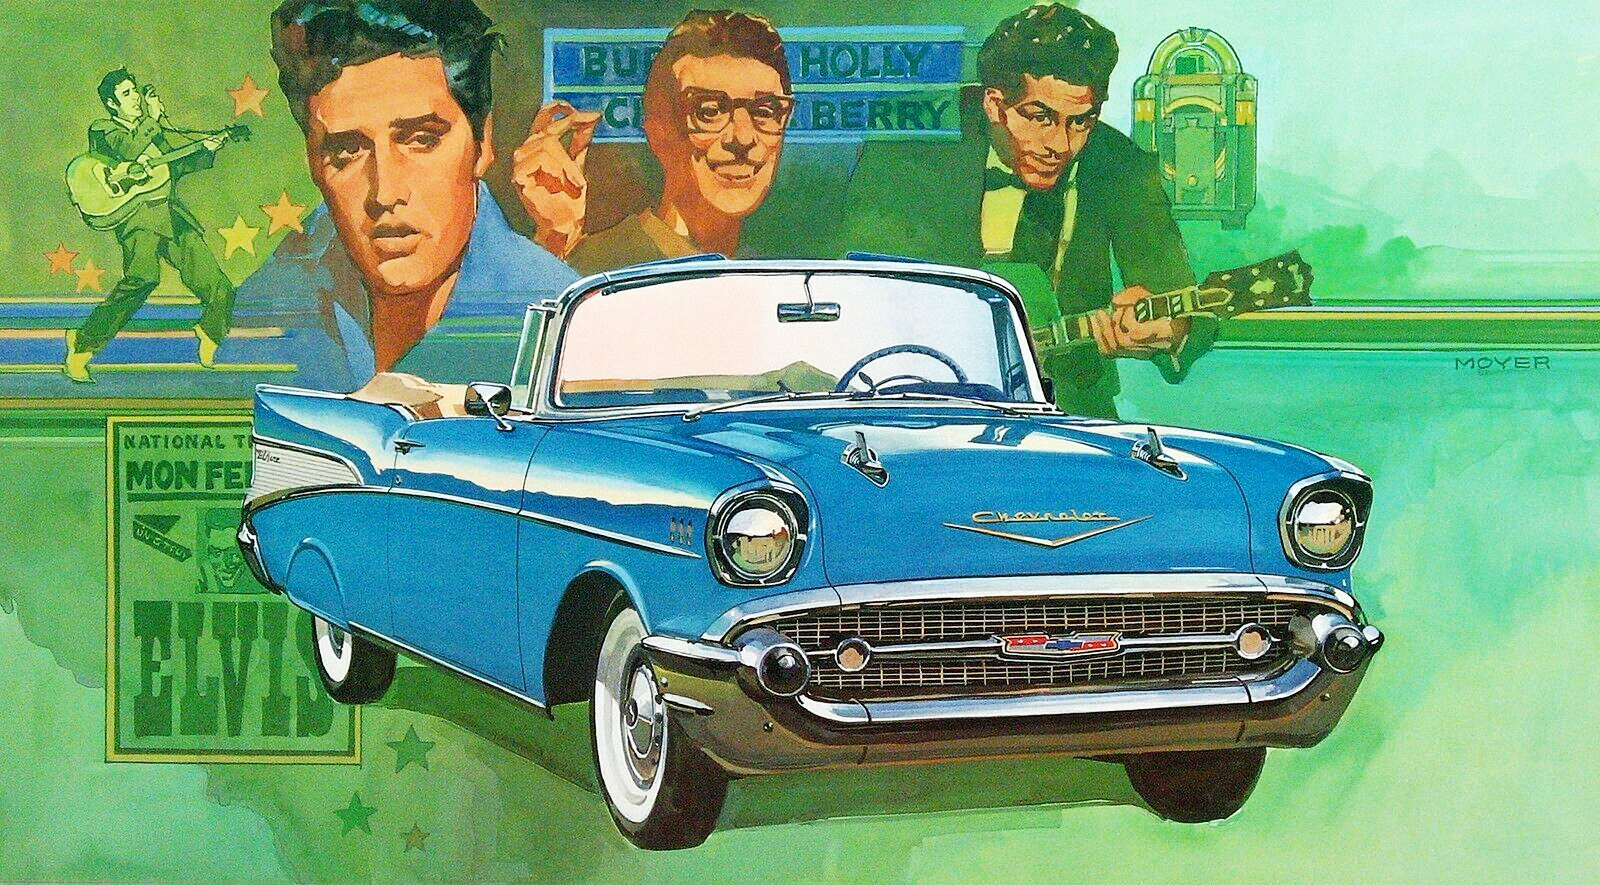 1957 Chevrolet Bel Air: Illustrated by Robert M. Moyer